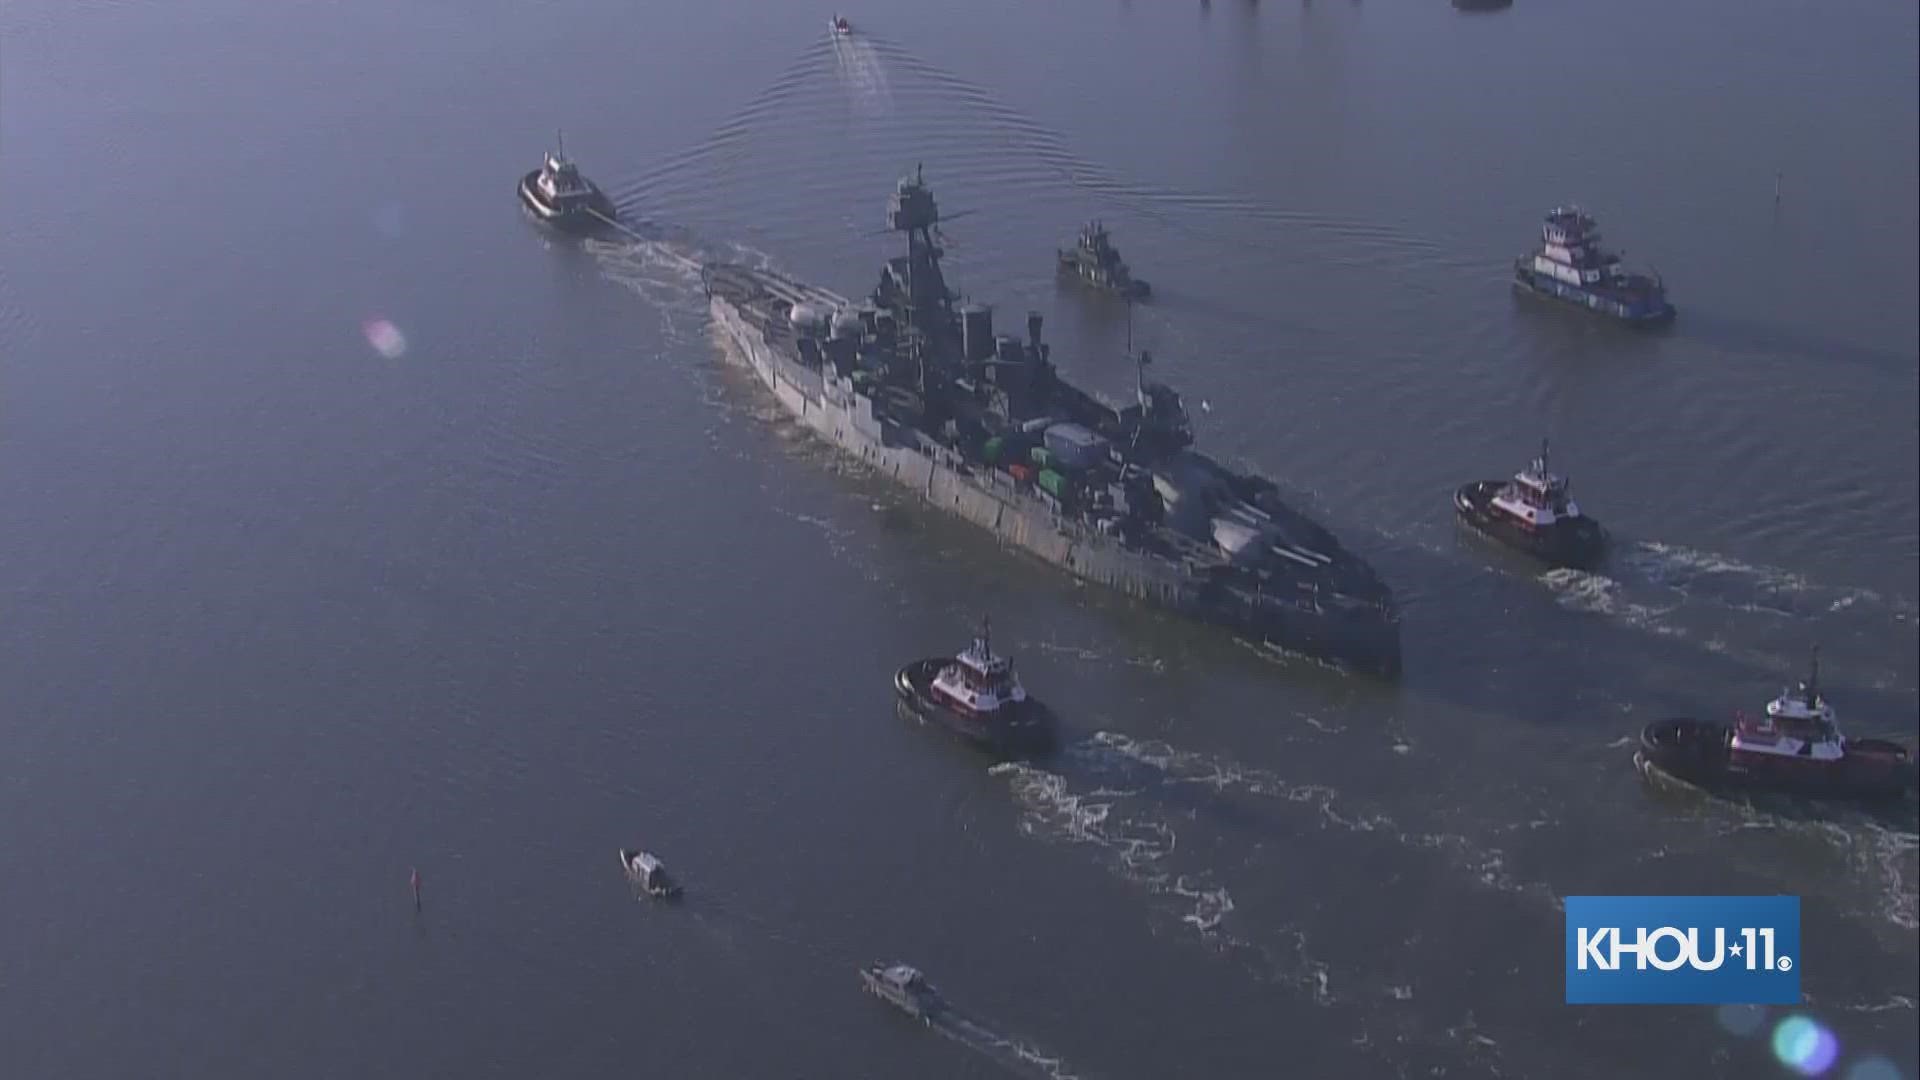 The Battleship Texas, the last remaining battleship that served in both World Wars, is headed to Galveston today for repairs.